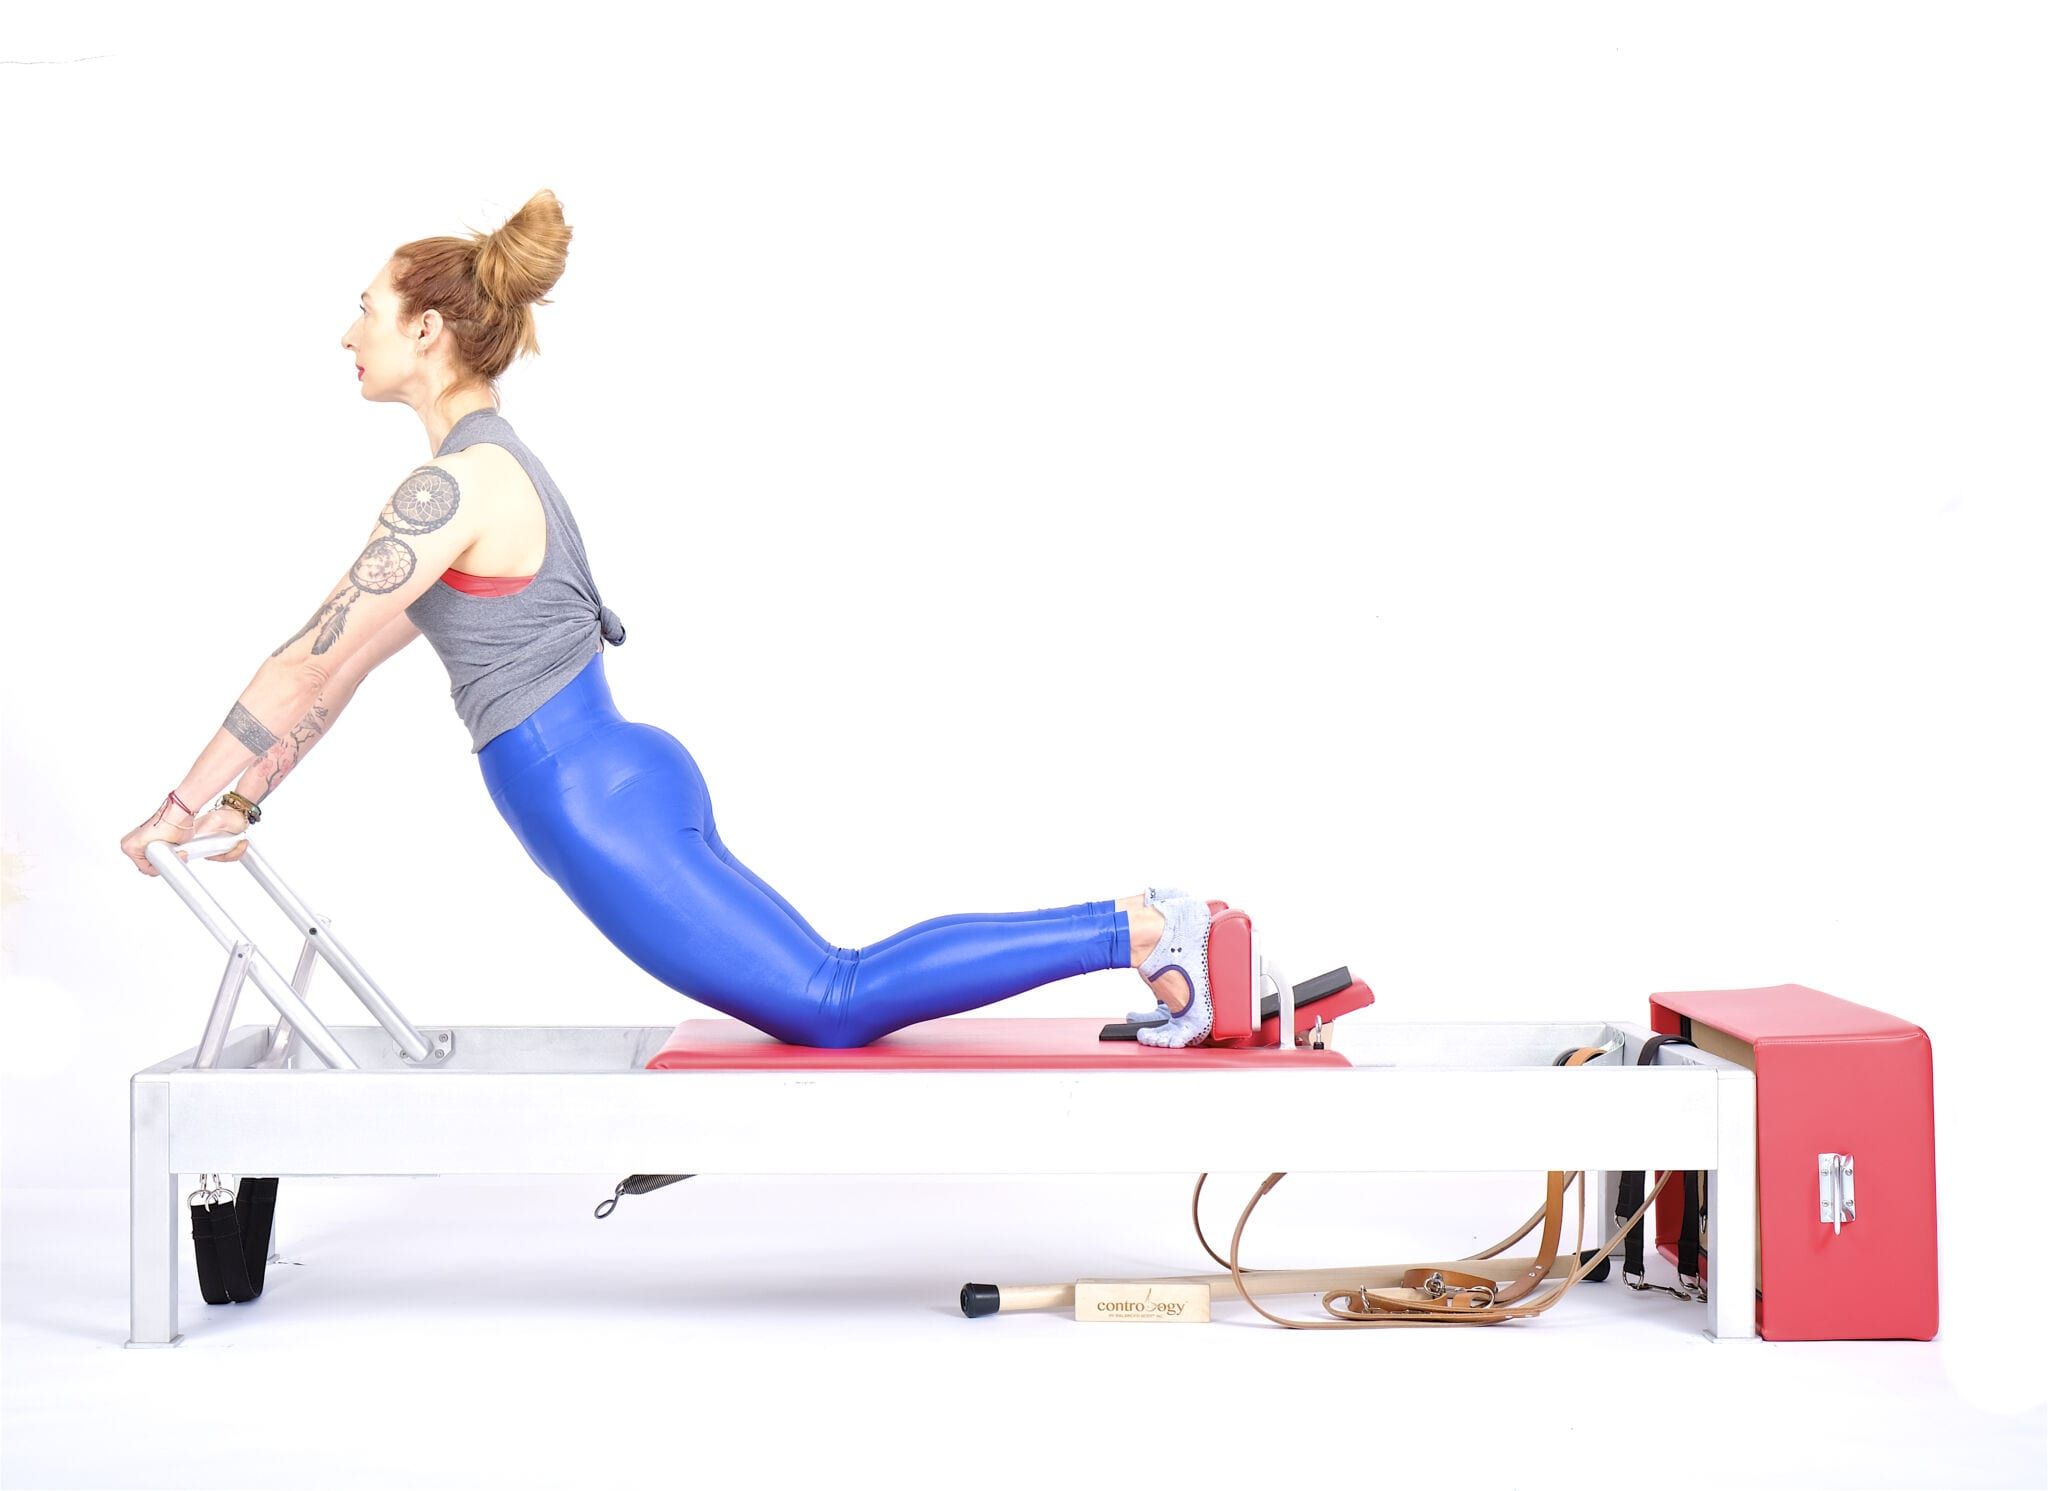 Reformer Pilates For Beginners: 5 Tips To Get Started - In Touch